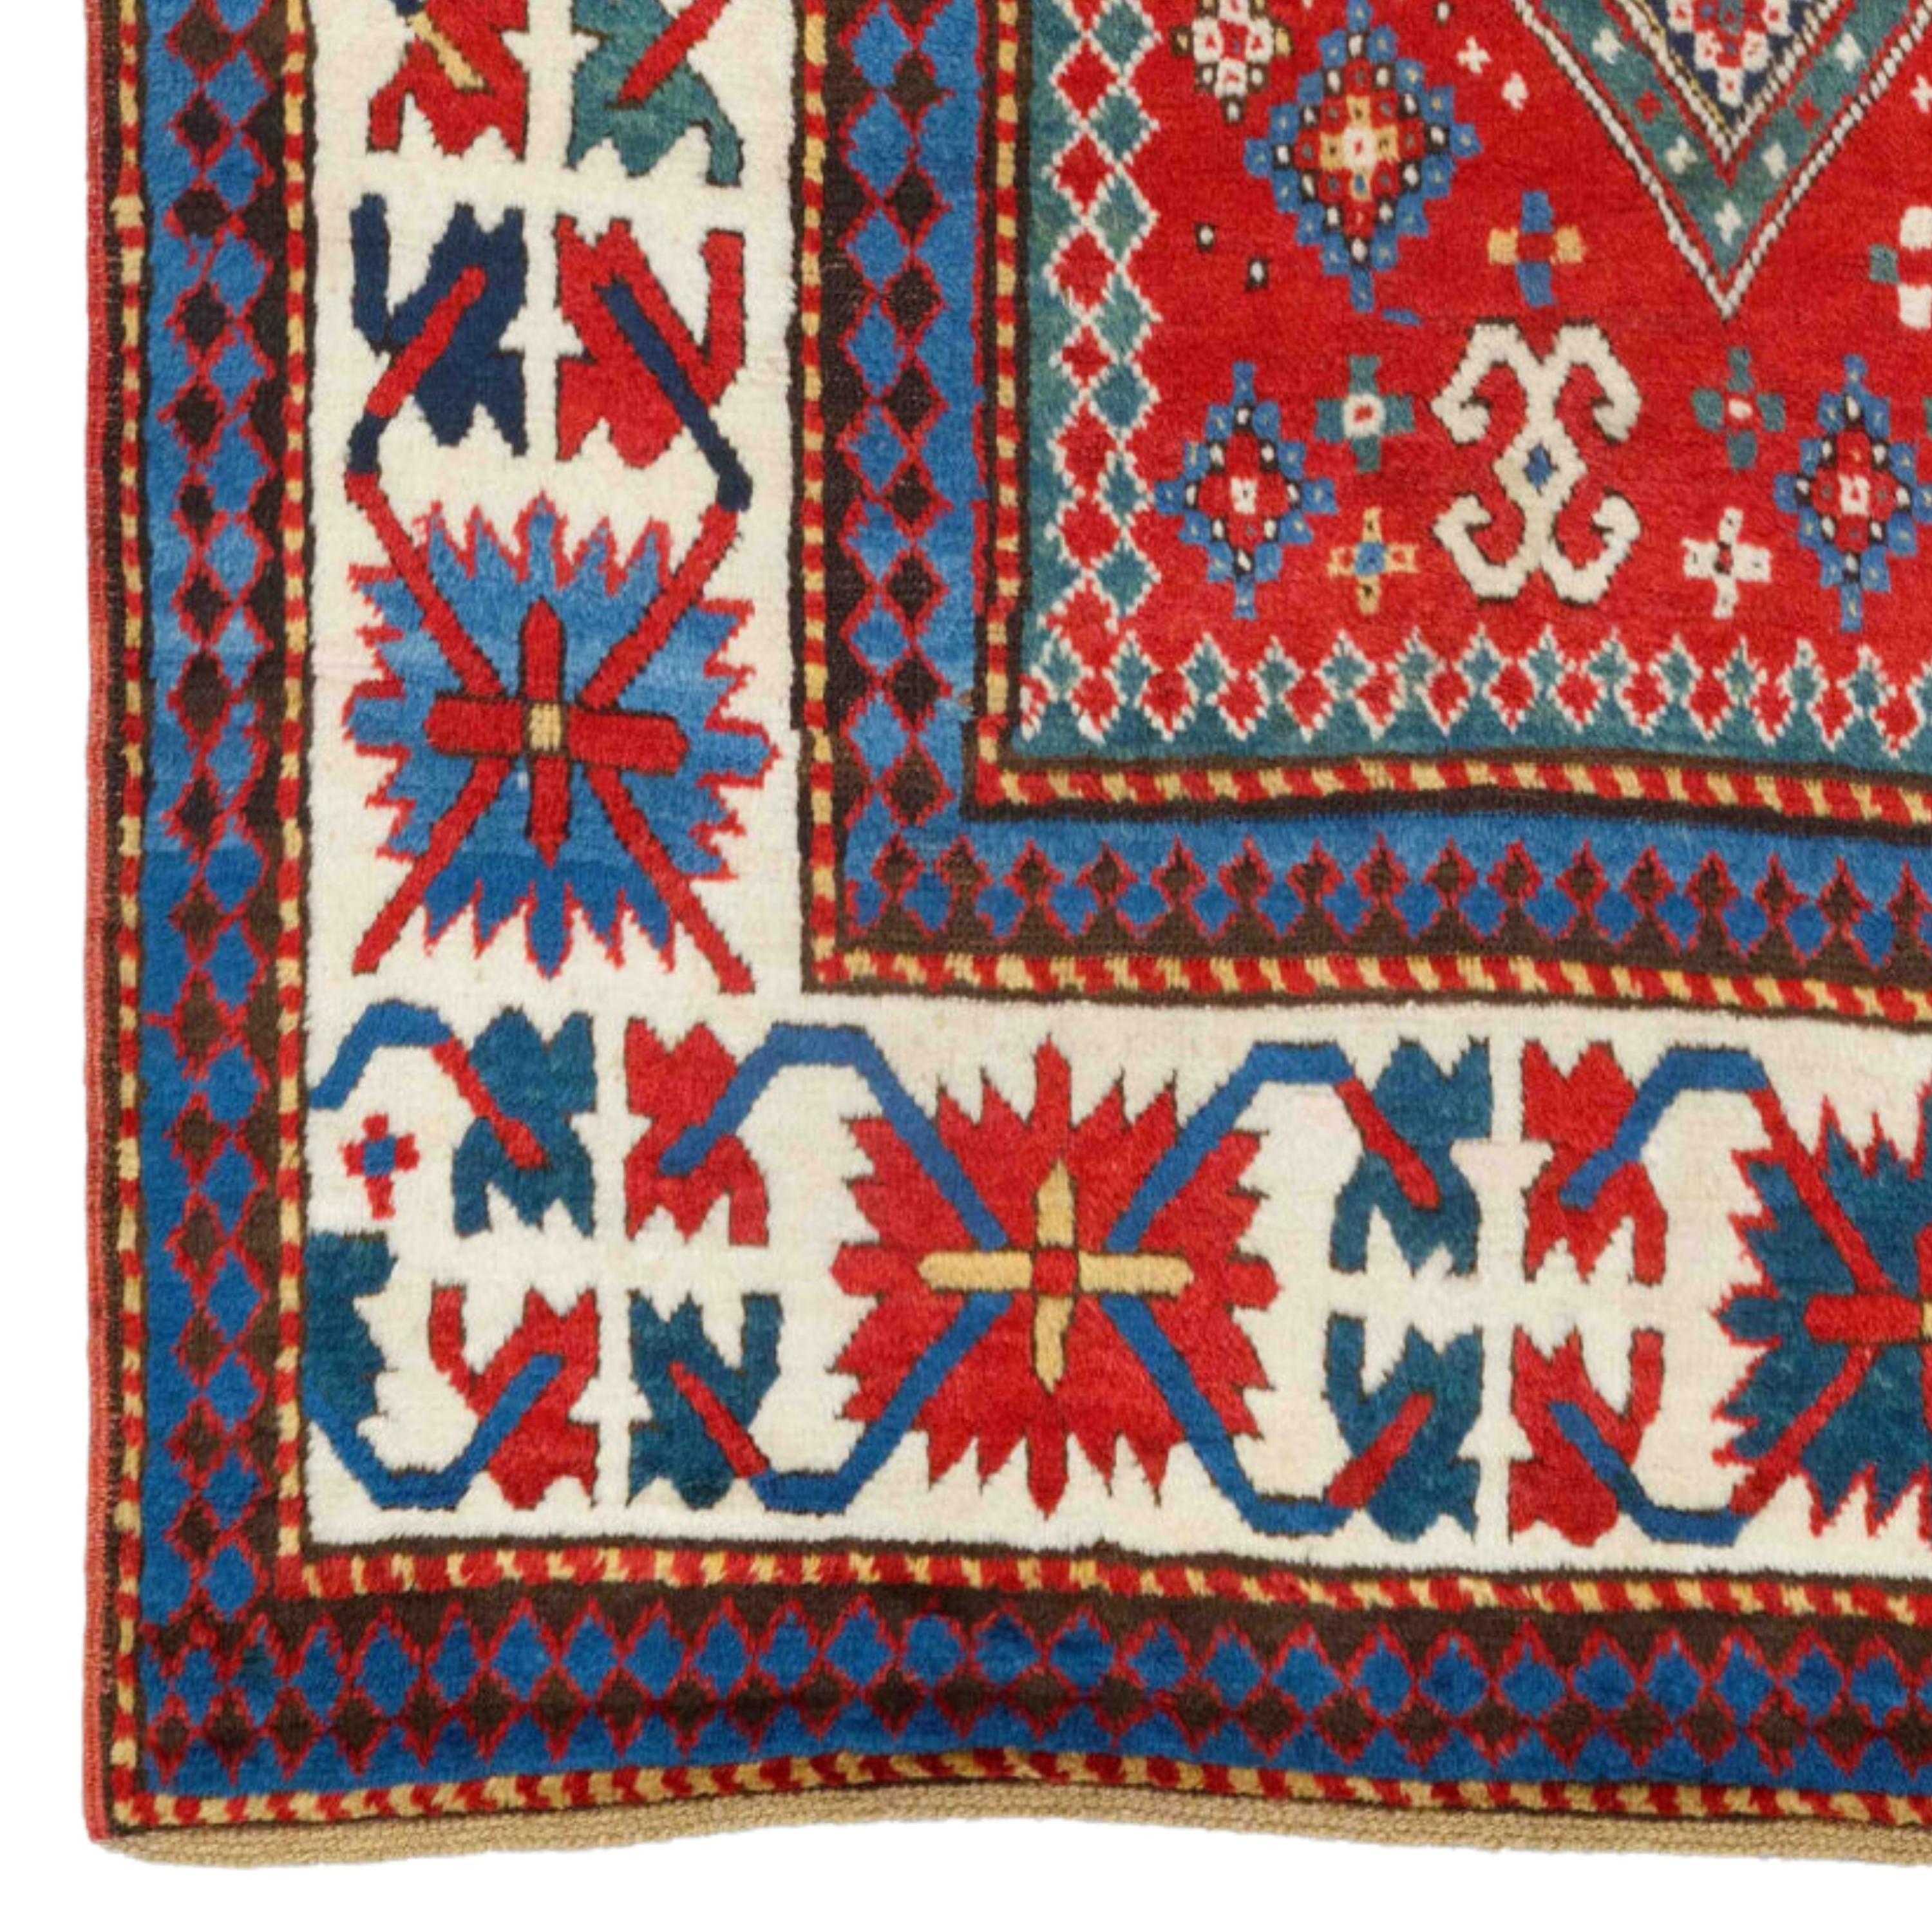 Middle of 19th Century South West Caucasian Rug Very good condition, with the original end and side finishes.Size 140 x 242 cm (4,59 - 7,93 ft)

This carpet is a rare and valuable Caucasian carpet woven in the 19th century. At the center of the